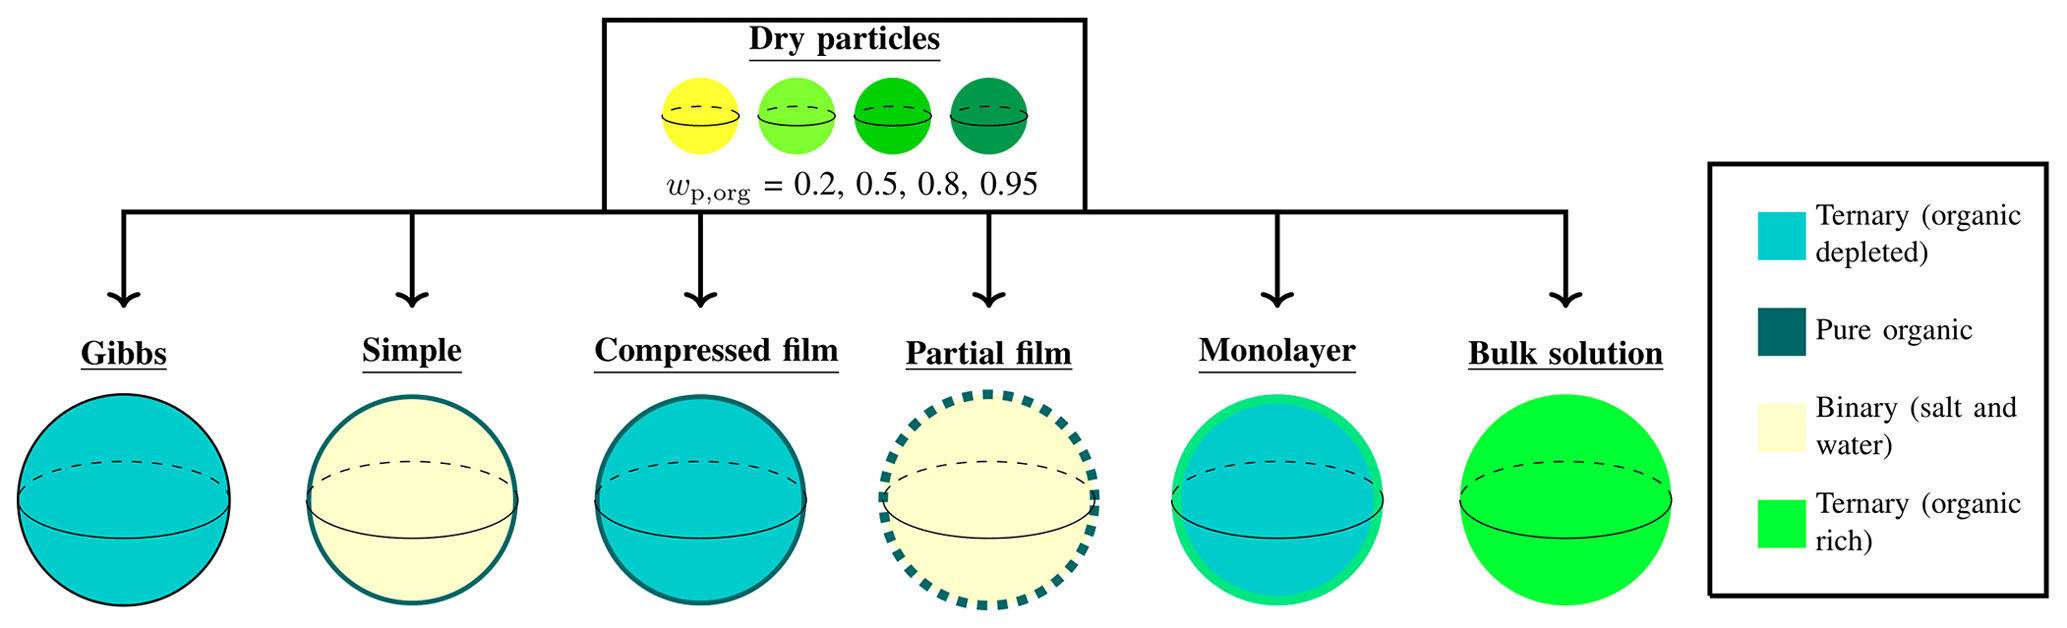 Graphical abstract from the paper 'Comparison of six approaches to predicting droplet activation of surface active aerosol – Part 1: moderately surface active organics​​​​​​​'. The figure shows the initial dry particles at a range of compositions (represented by the different colors of the particles), and the different models used to predict droplet critical properties. The different models are described at some point of droplet growth before activation, with the different colors of the droplet bulks or surfaces indicating differences in composition.